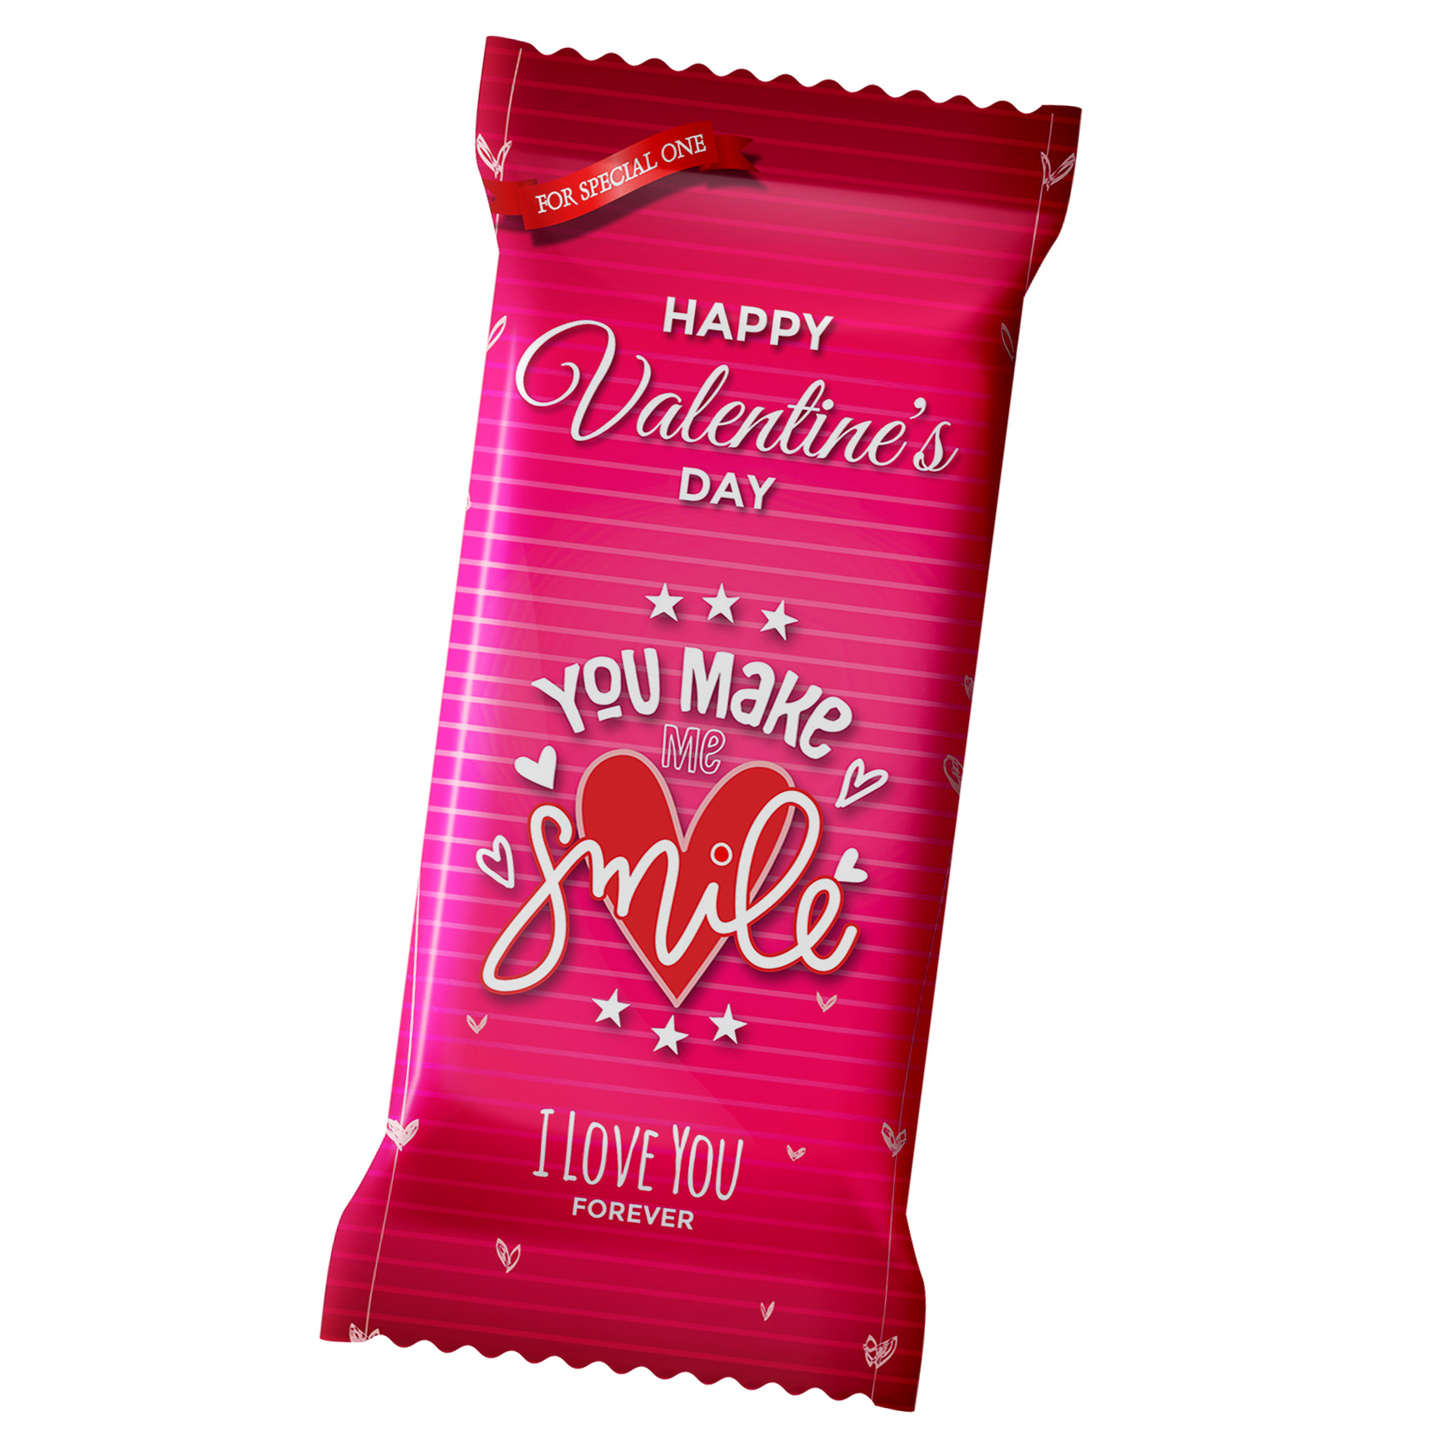 Valentines Day Gift, Chocolate Large Bar 100g